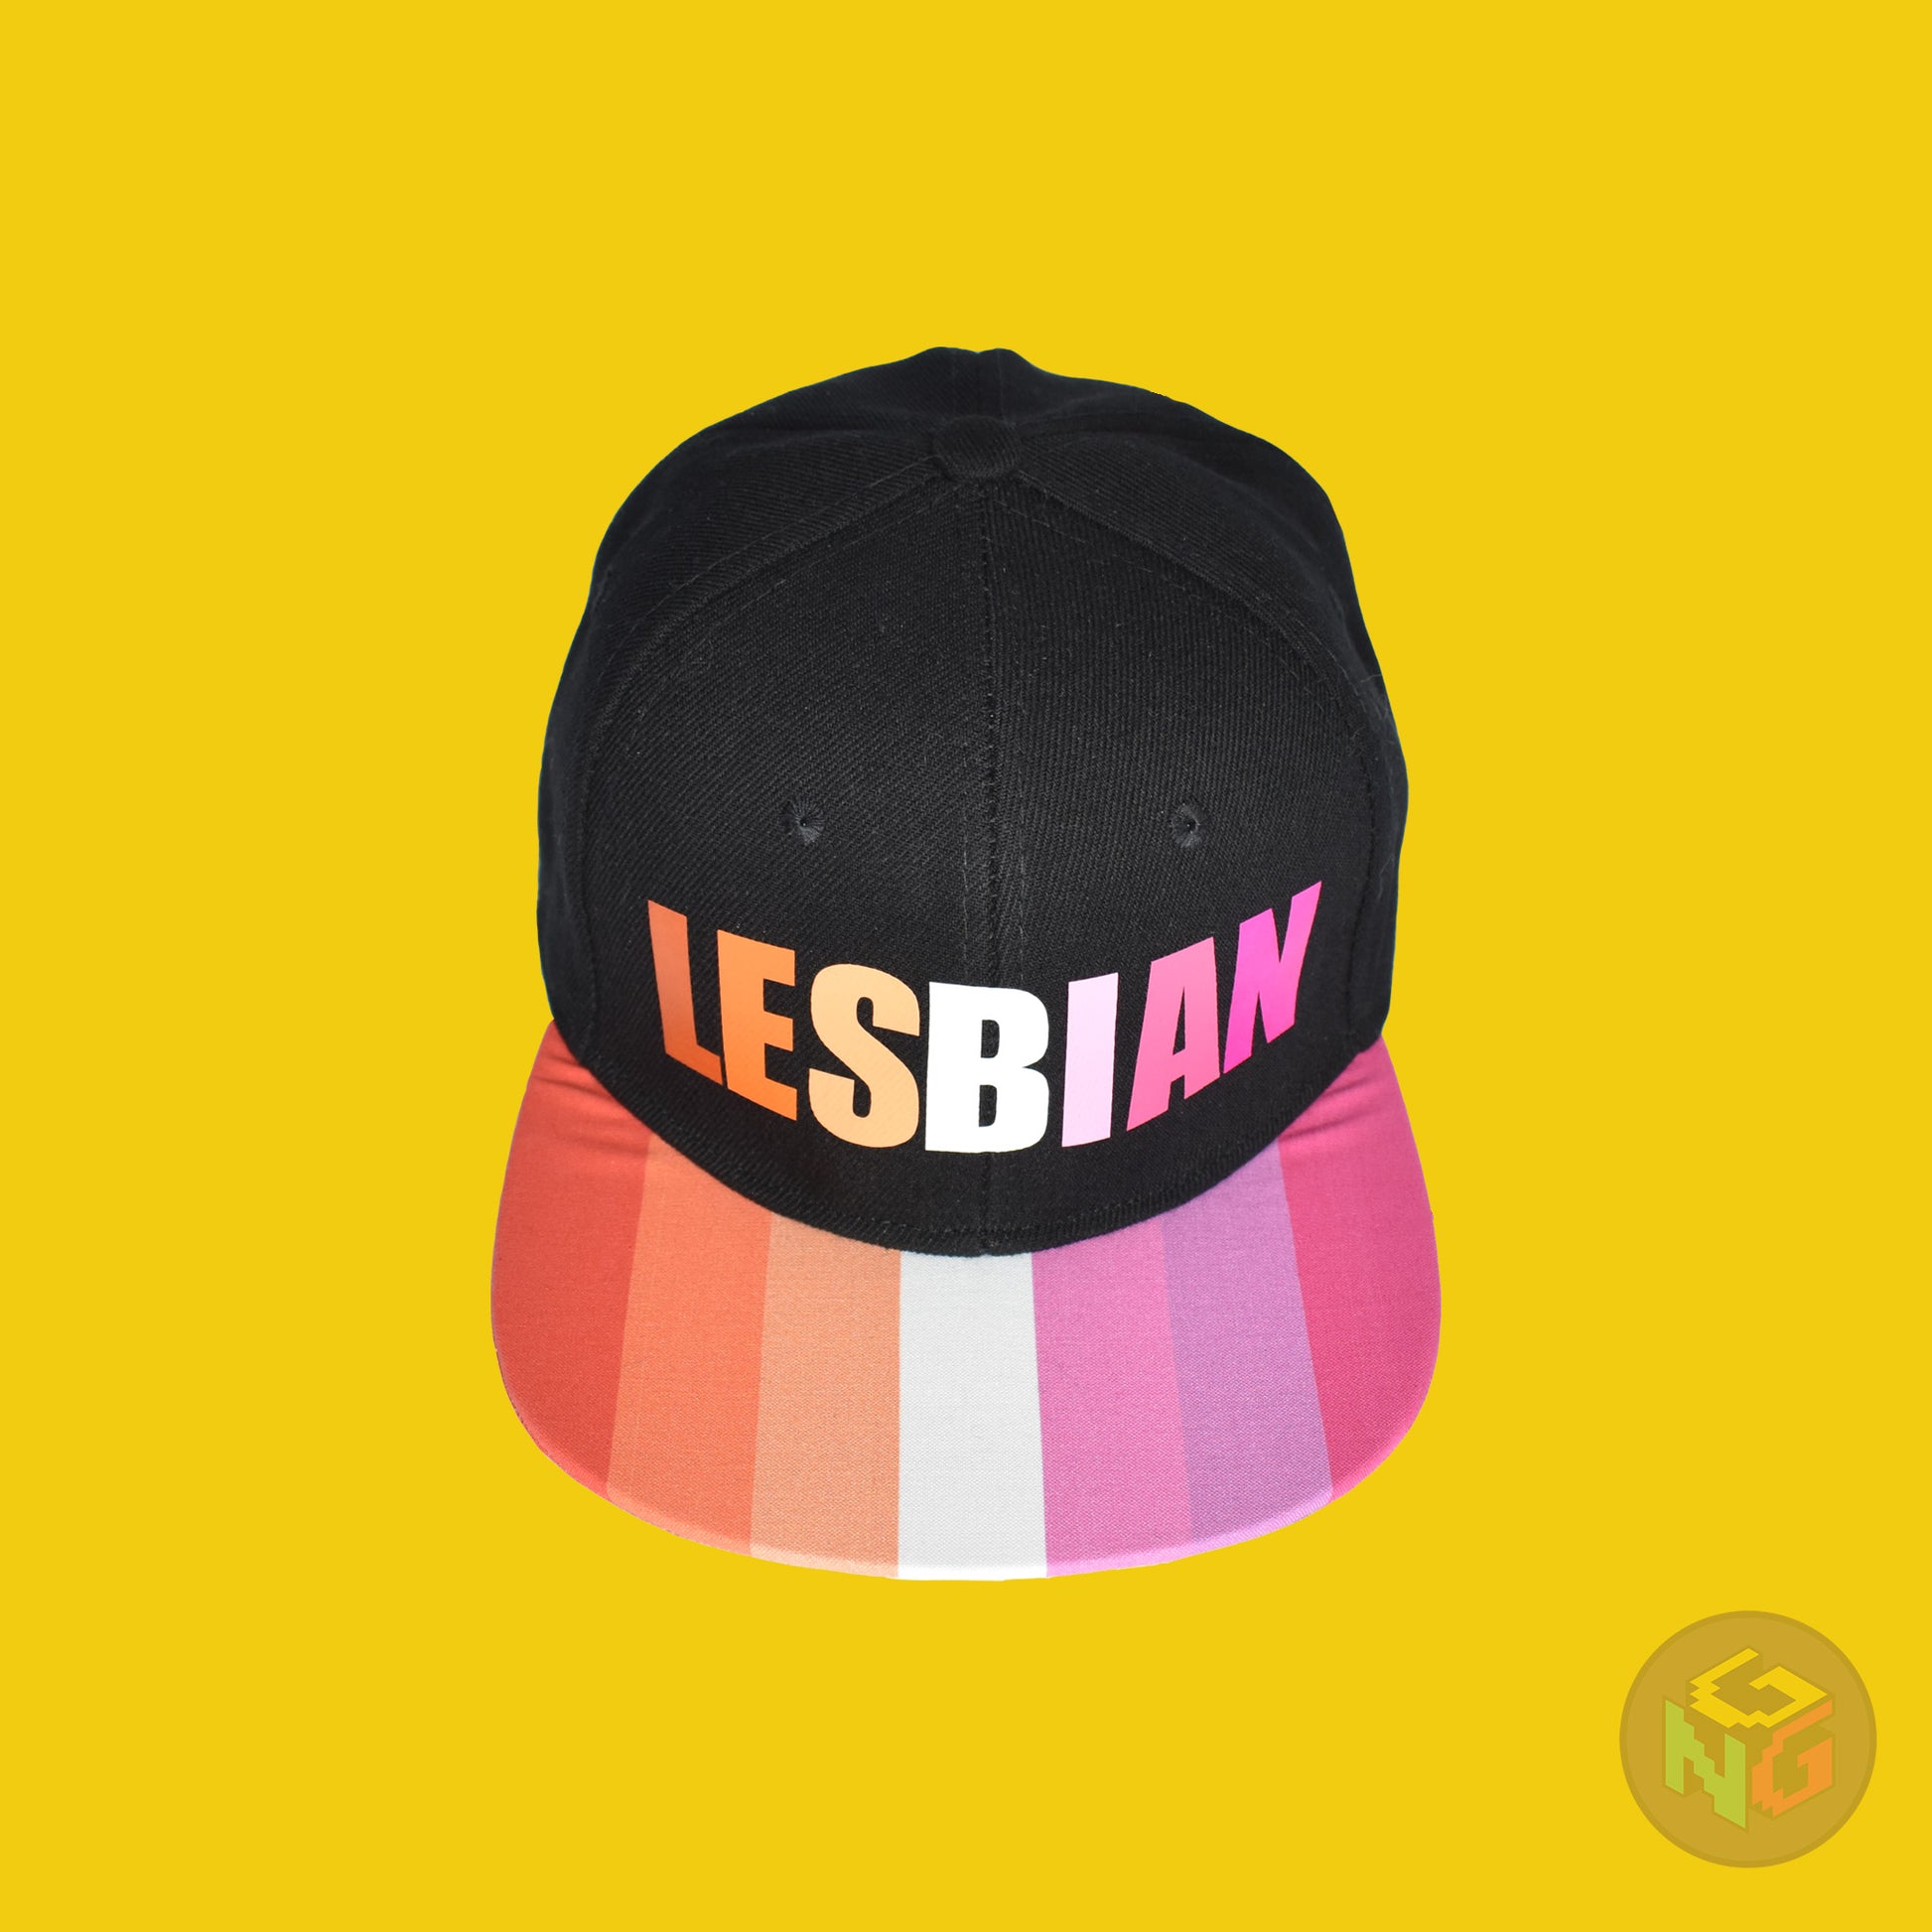 Black flat bill snapback hat. The brim has the lesbian pride flag on both sides and the front of the hat has the word “LESBIAN” in orange, pink, and white letters. Front top view